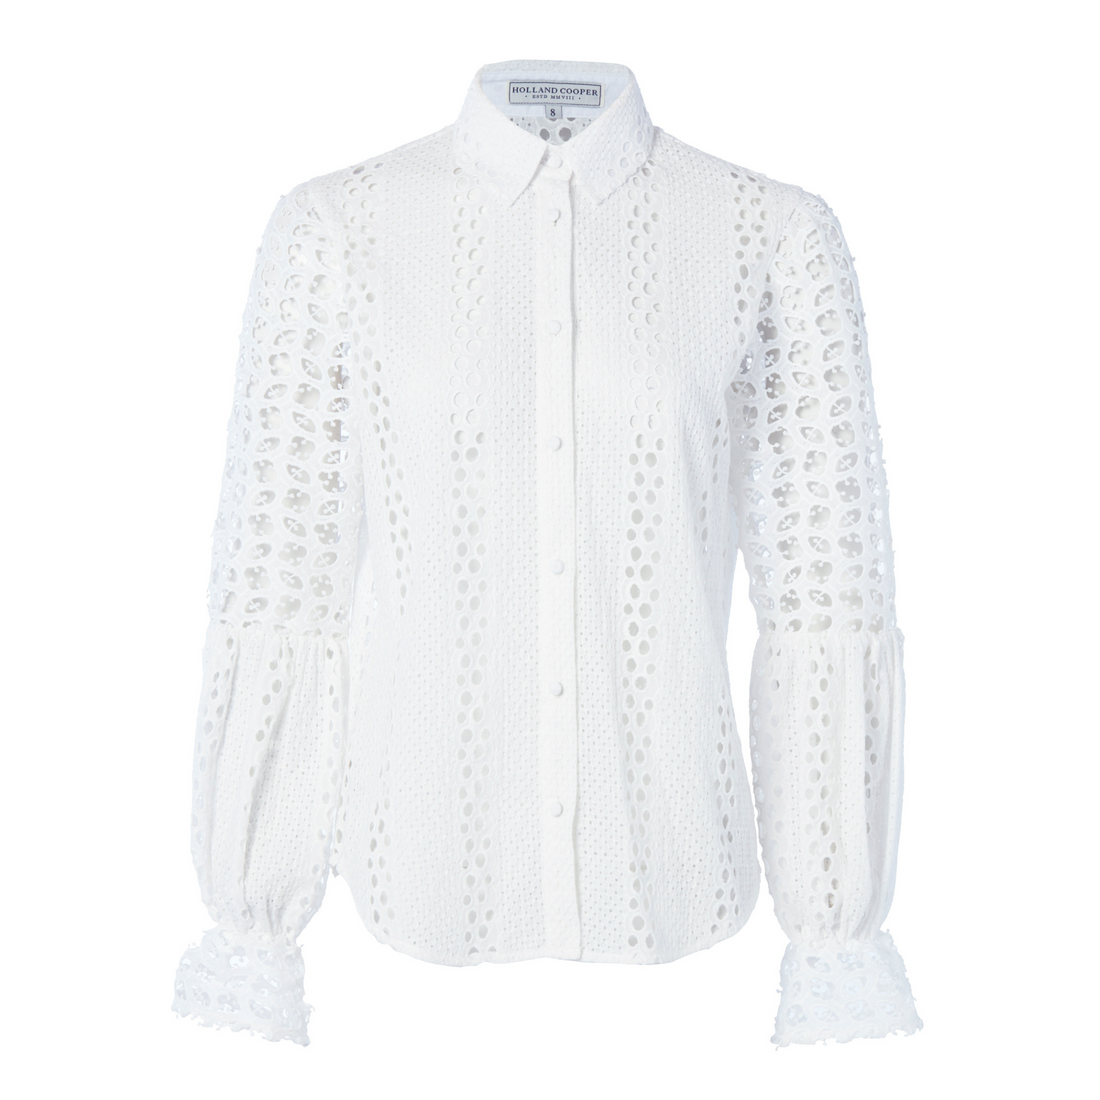 Broderie Lace Shirt White